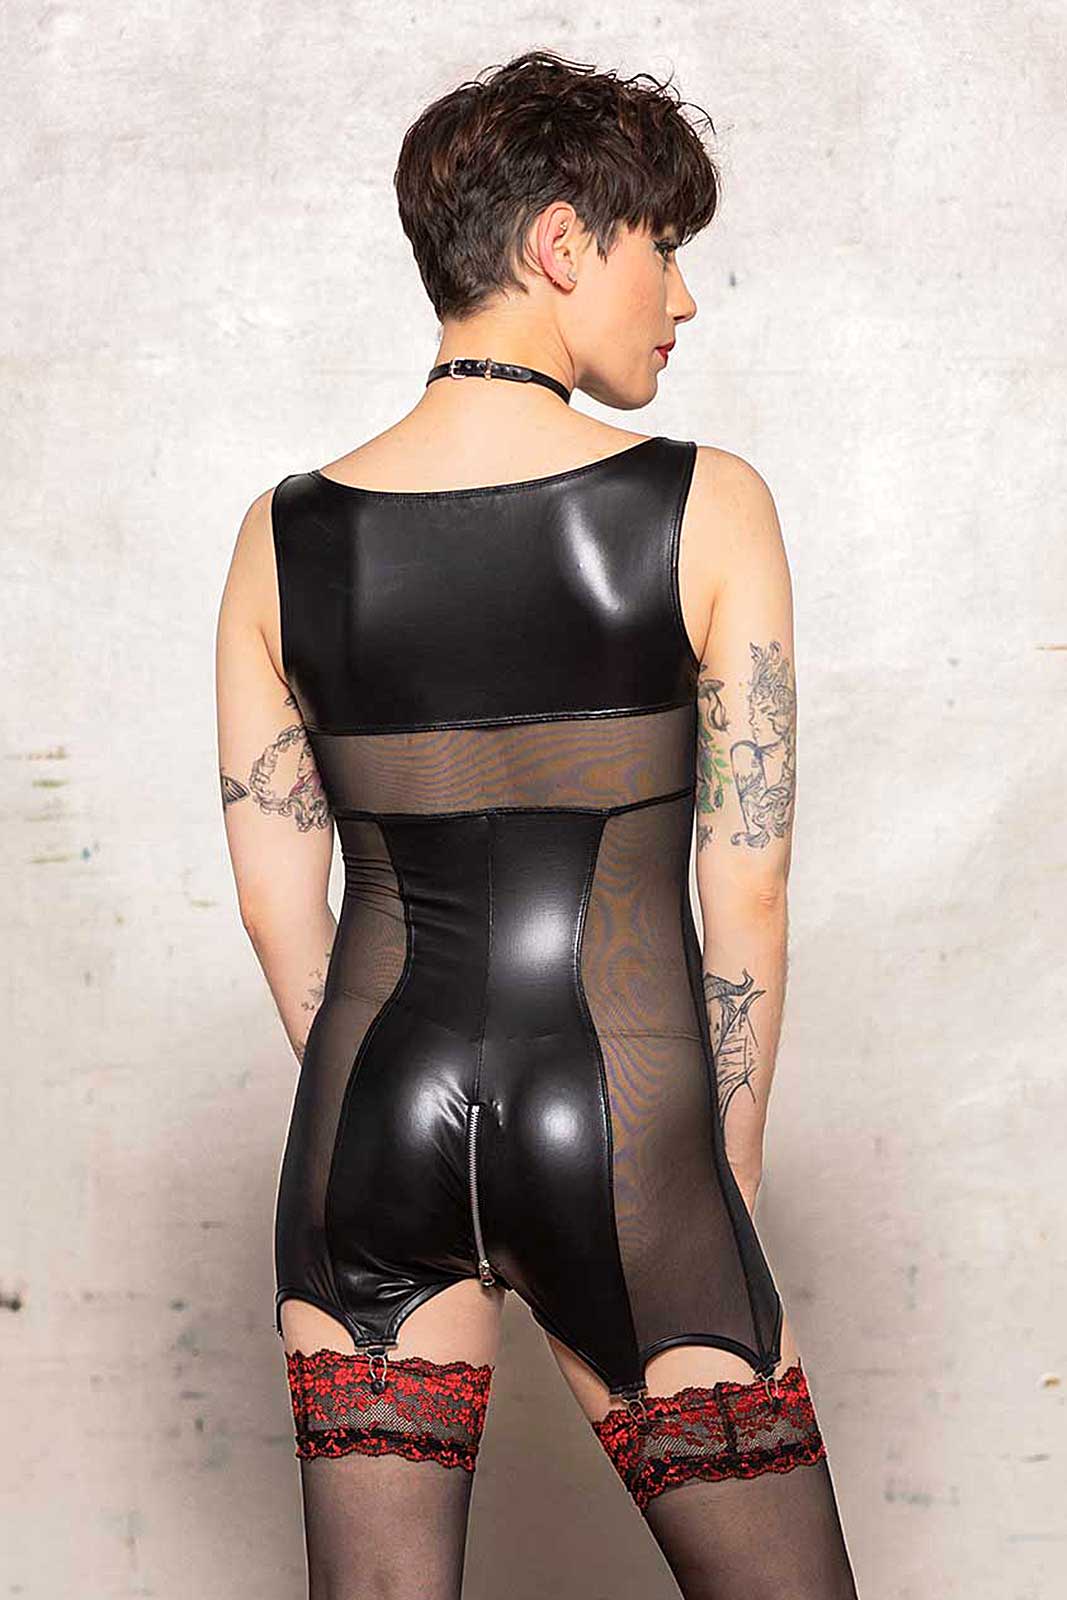 The Alba Wetlook & Mesh Romper Playsuit on model with fishnet thigh highs, rear view.